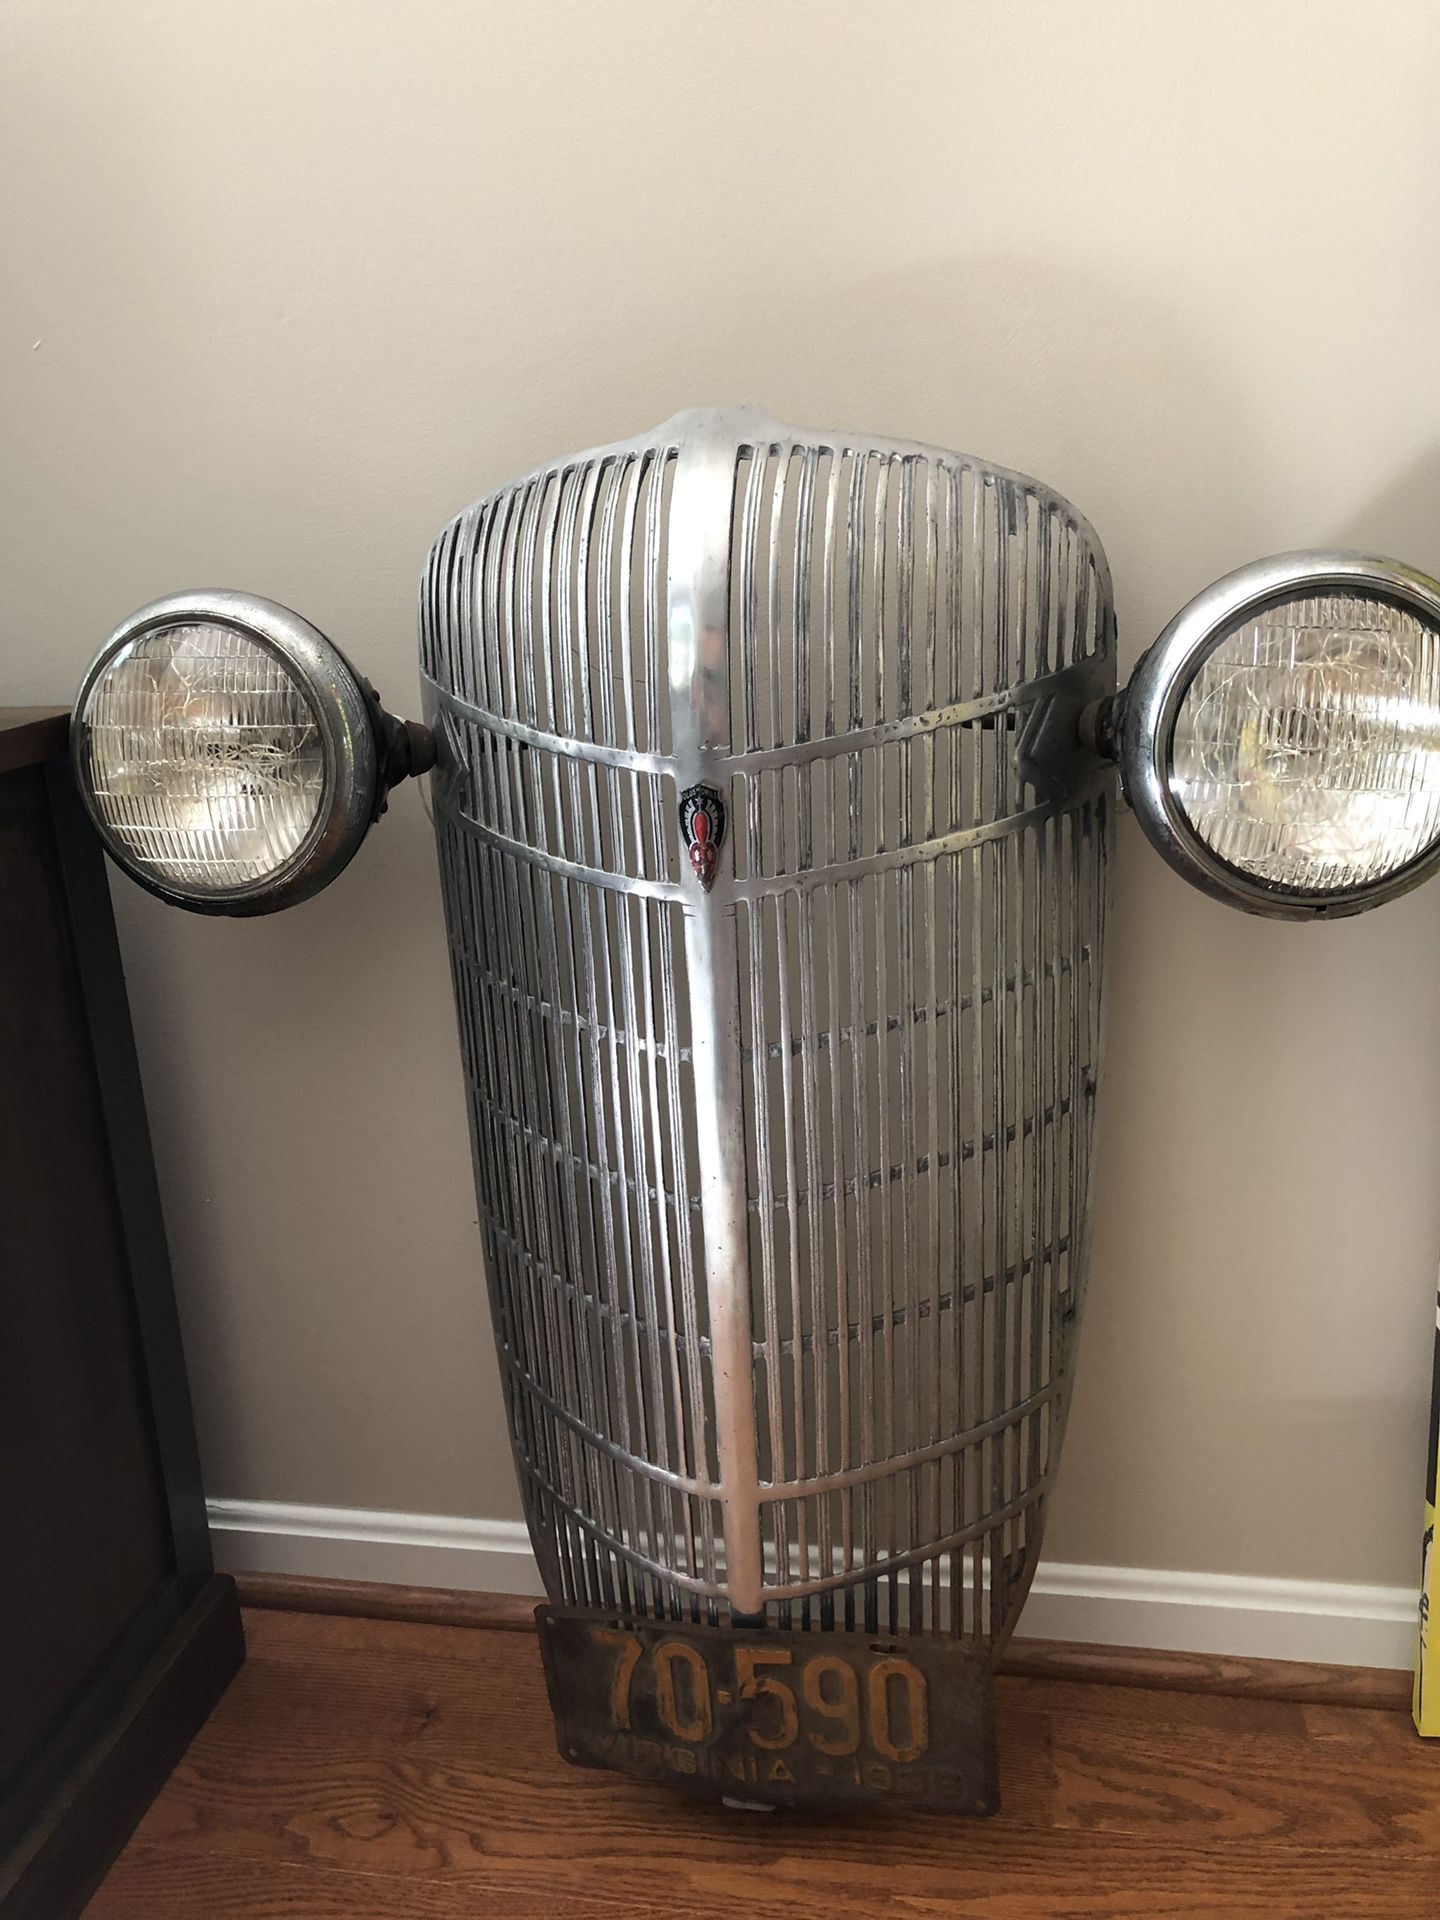 1936 Oldsmobile Grill with lights